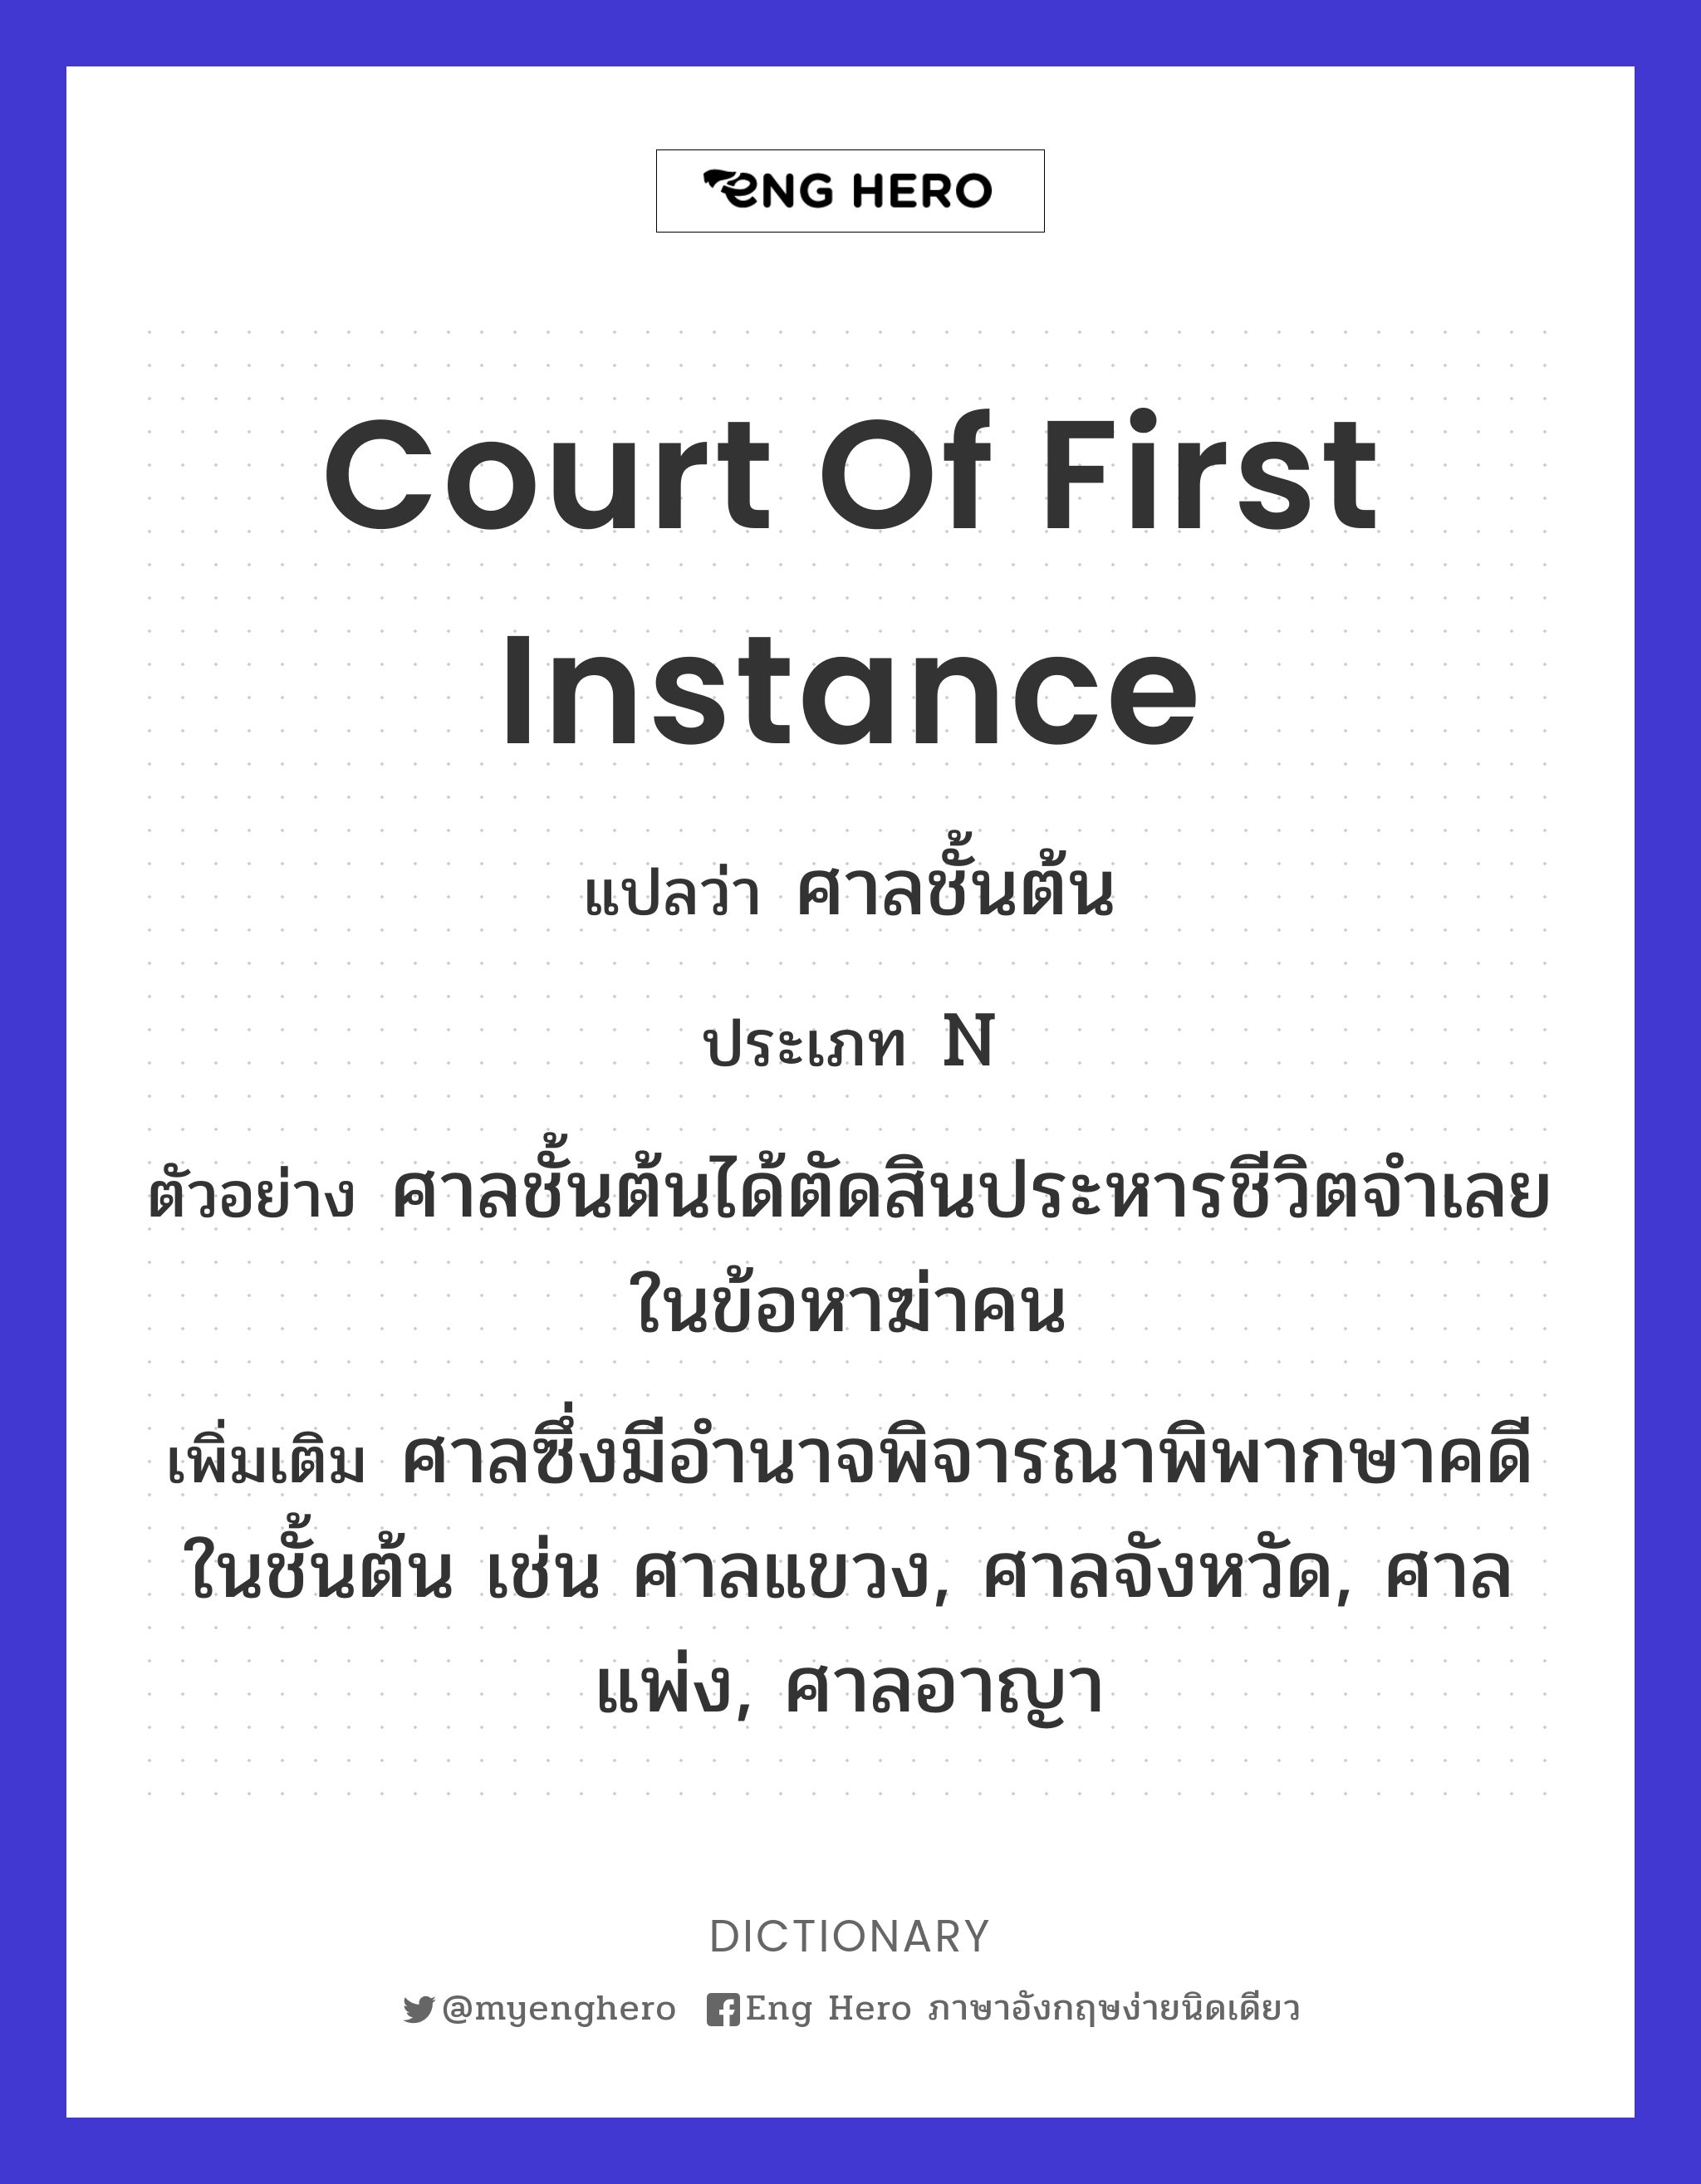 Court of First Instance